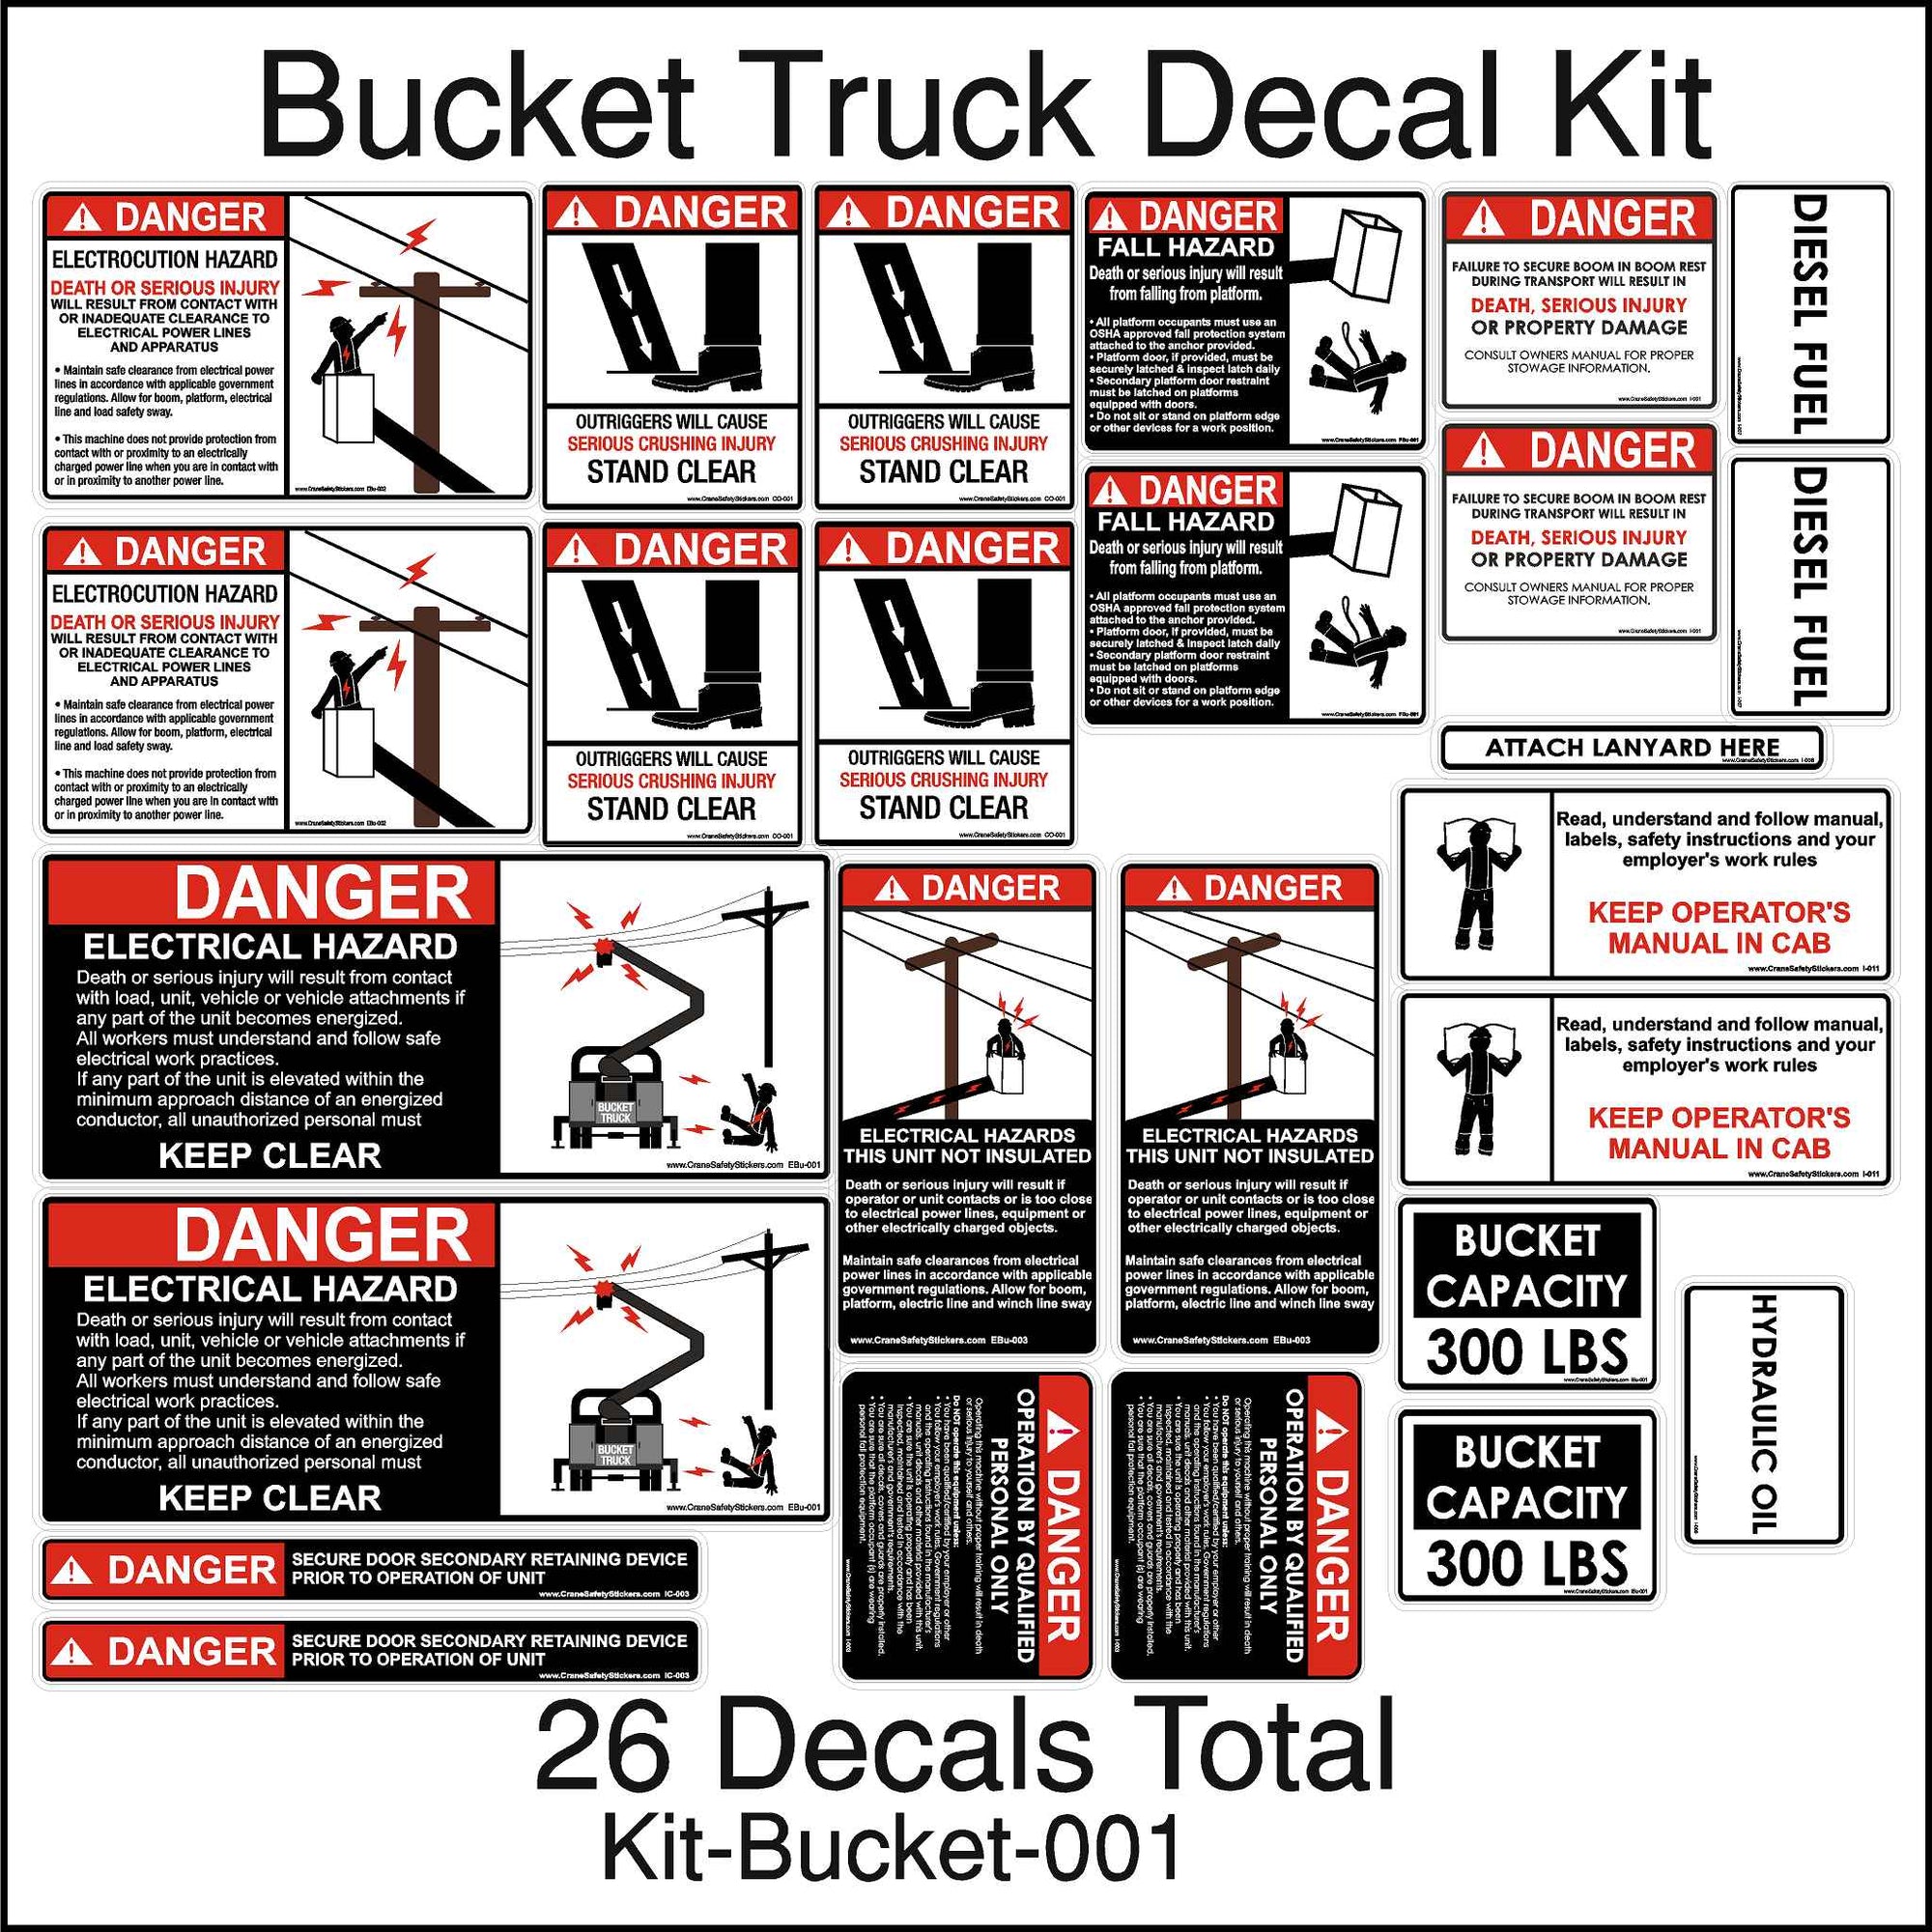 This Bucket Truck Decal Kit has 26 different Stickers. Each sticker is printed with the corresponding danger header. All Stickers are printed in bright colors to warn for specific dangers and have pictorials of the dangers of using a bucket truck. 